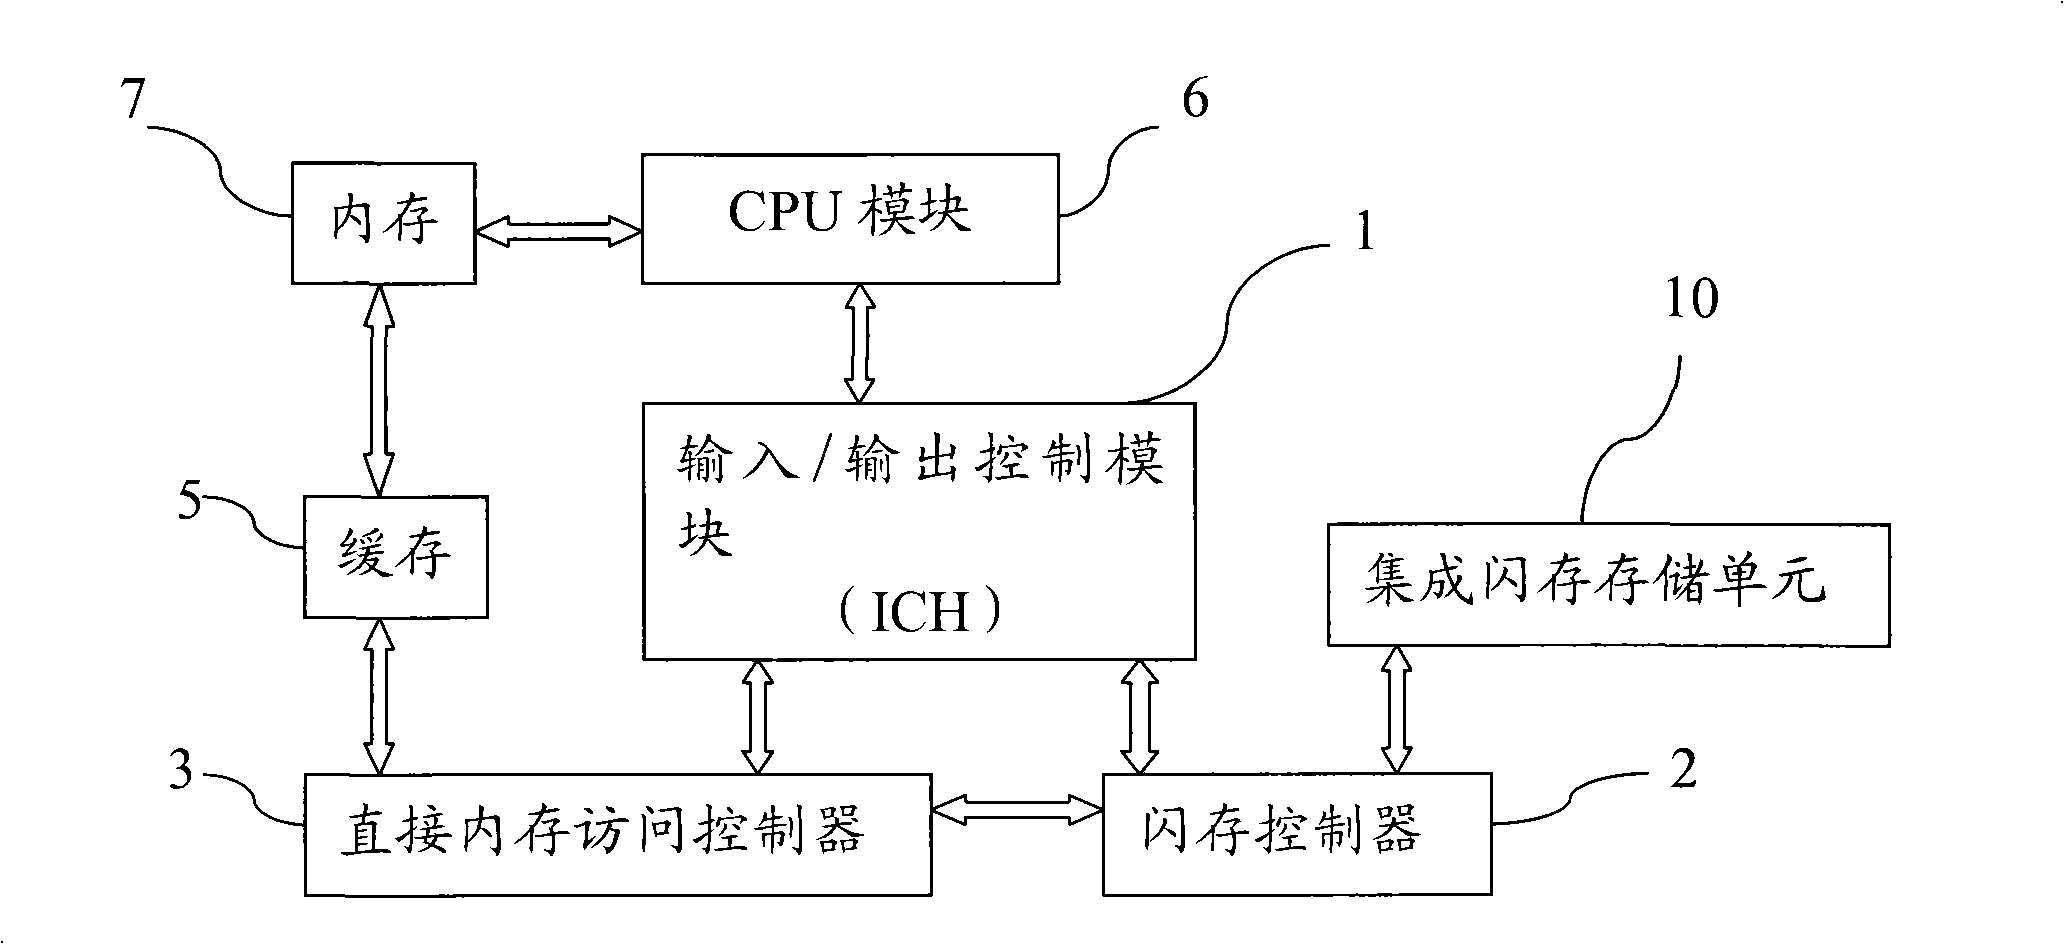 Mainboard with integrated flash memory storage unit